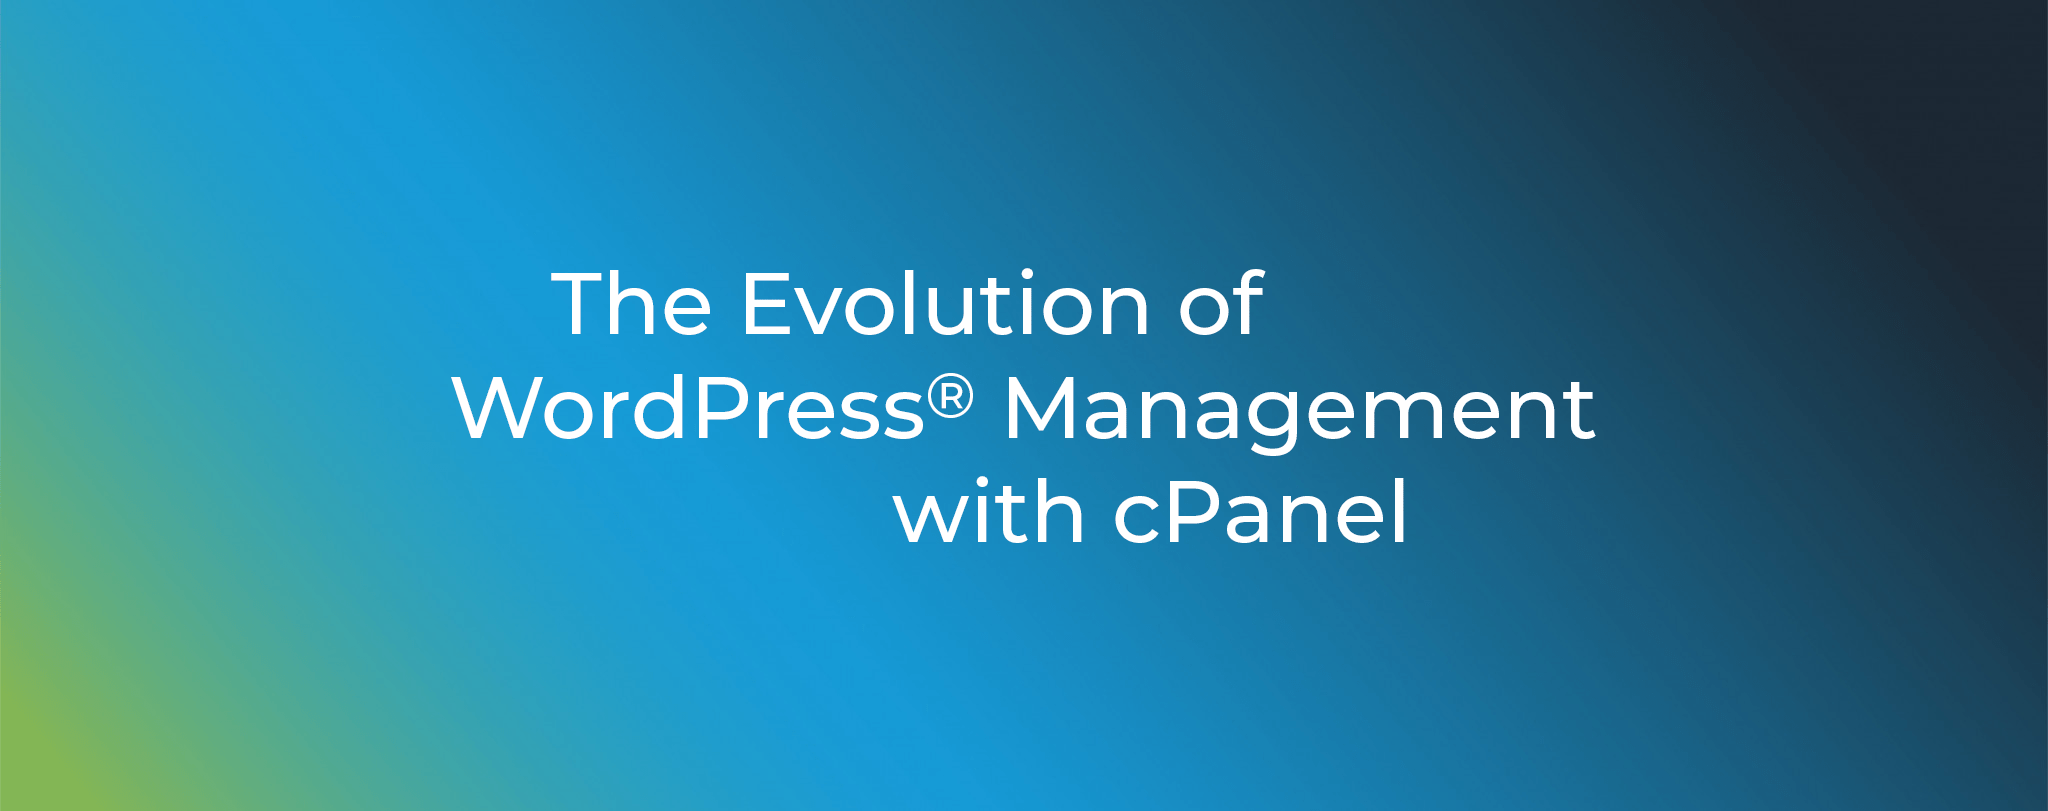 Evolution of WordPress Management with cPanel